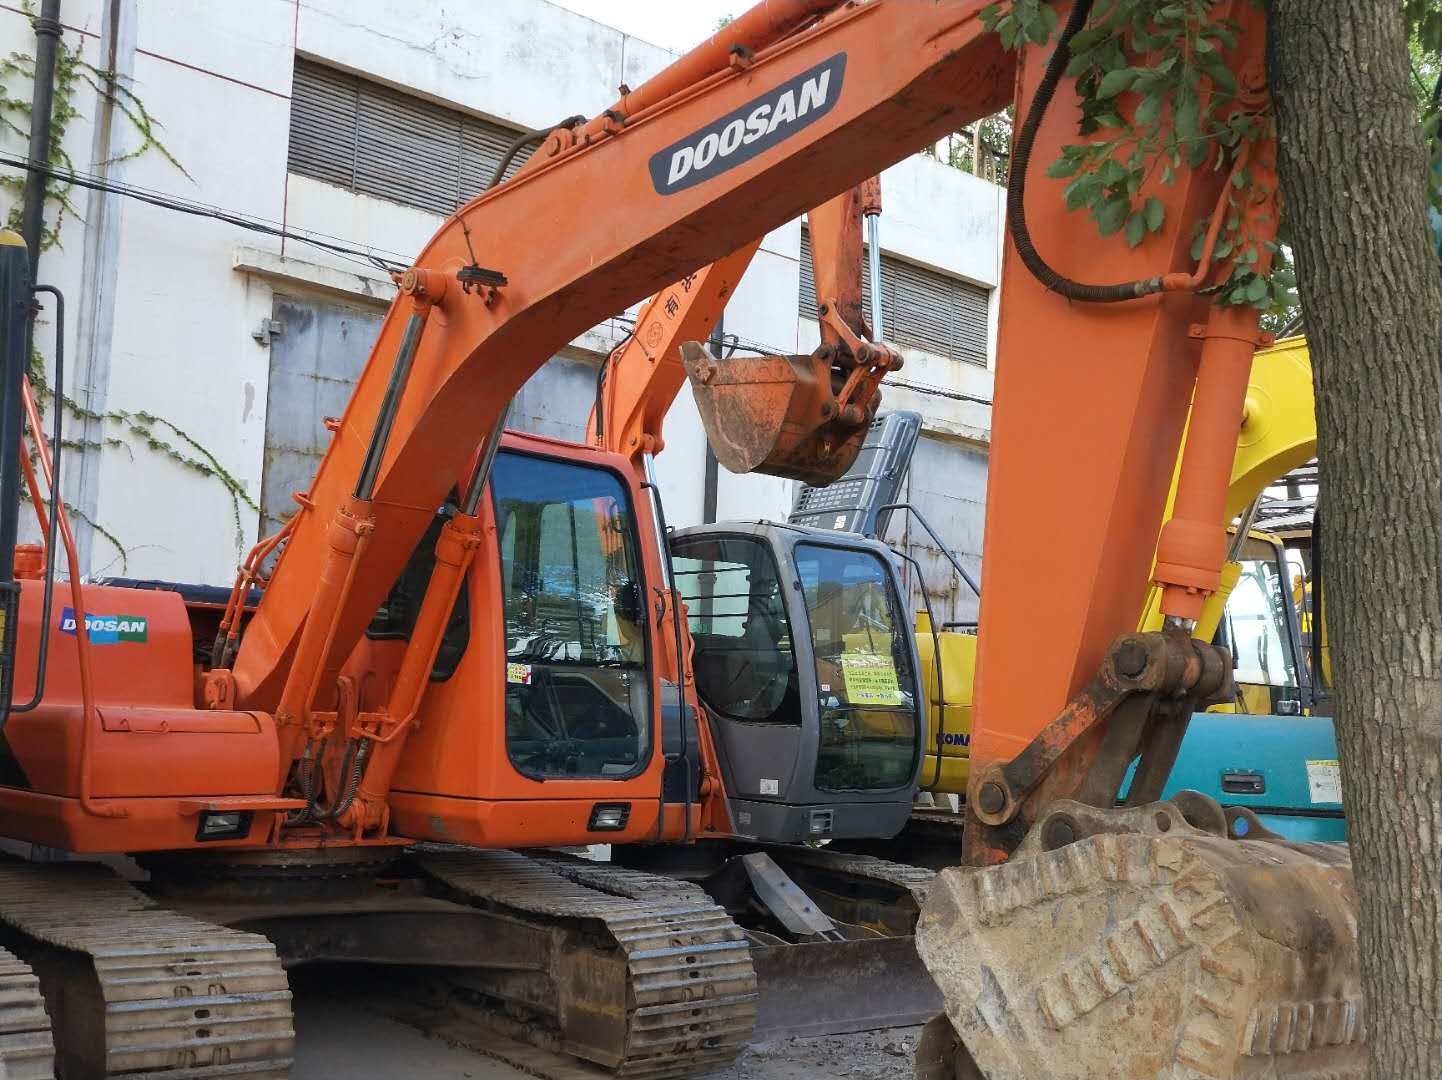 Used 2012 Year Construction Machine 15 Tons Crawler Excavator Doosan Dh150LC-7 Tracked Digger